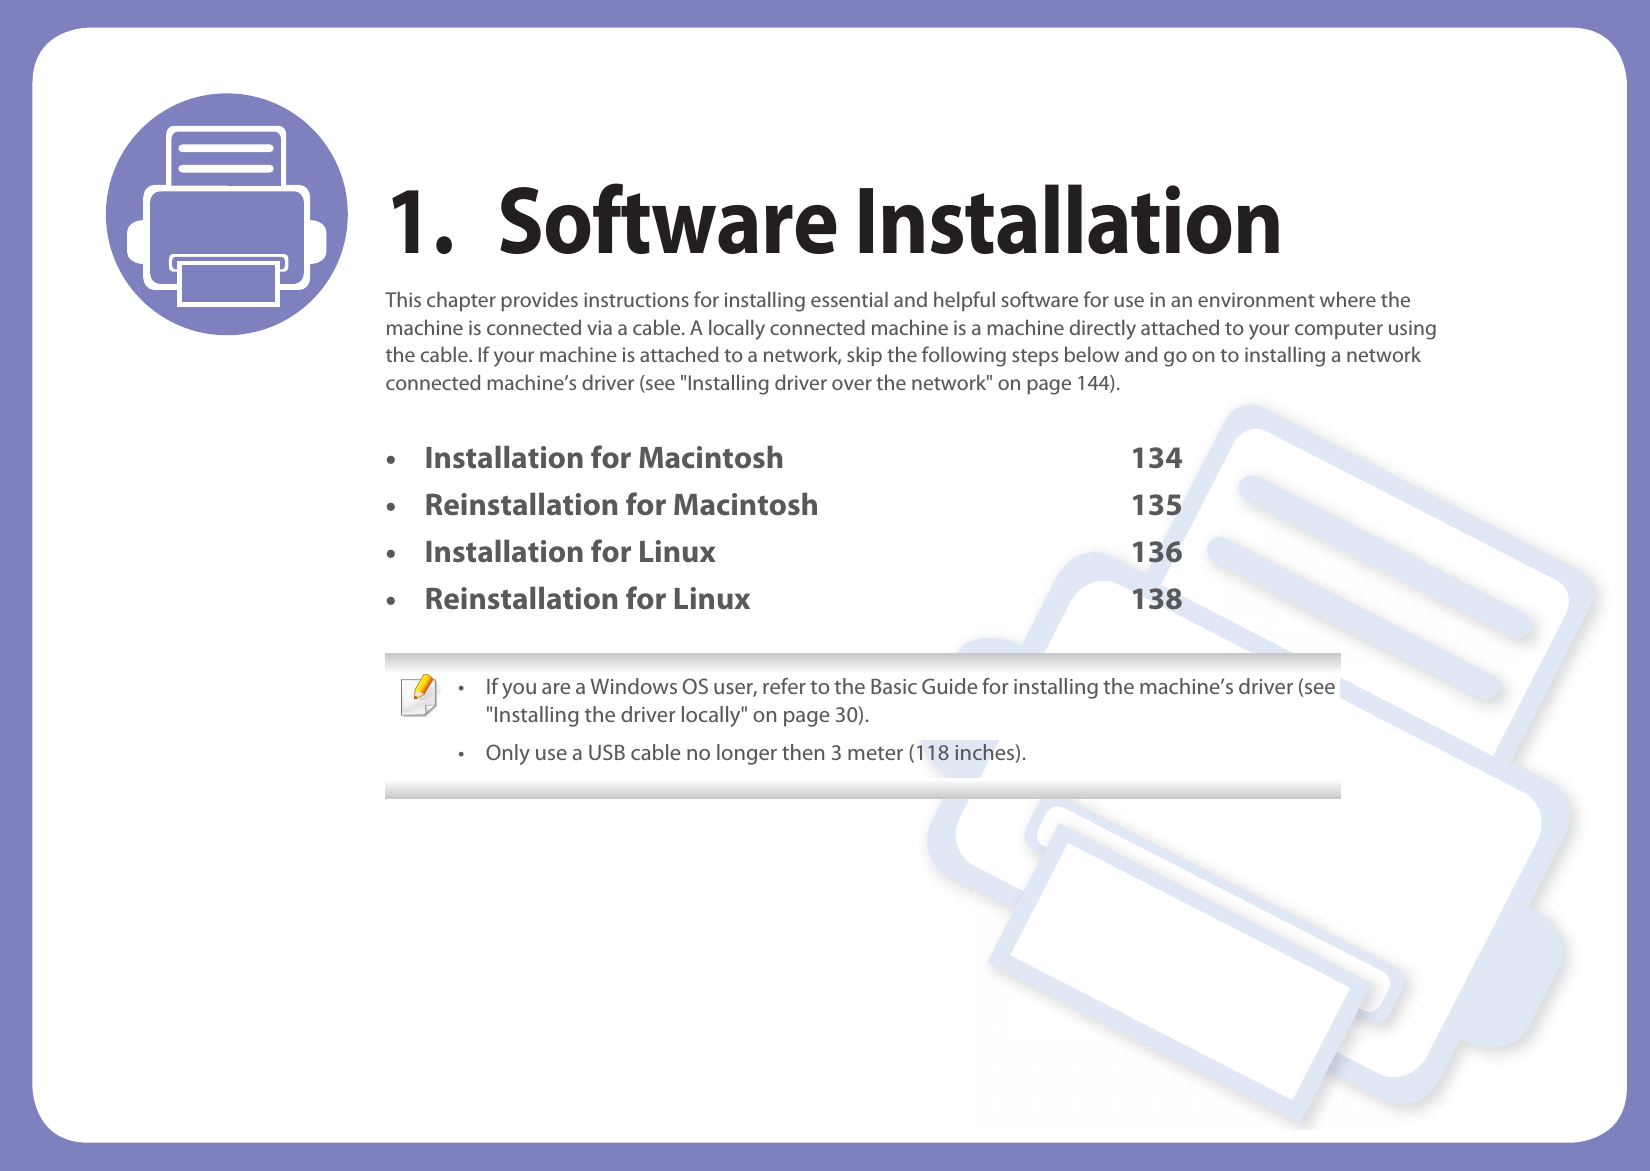 1. Software InstallationThis chapter provides instructions for installing essential and helpful software for use in an environment where the machine is connected via a cable. A locally connected machine is a machine directly attached to your computer using the cable. If your machine is attached to a network, skip the following steps below and go on to installing a network connected machine’s driver (see &quot;Installing driver over the network&quot; on page 144).• Installation for Macintosh 134• Reinstallation for Macintosh 135• Installation for Linux 136• Reinstallation for Linux 138 • If you are a Windows OS user, refer to the Basic Guide for installing the machine’s driver (see &quot;Installing the driver locally&quot; on page 30).• Only use a USB cable no longer then 3 meter (118 inches). 